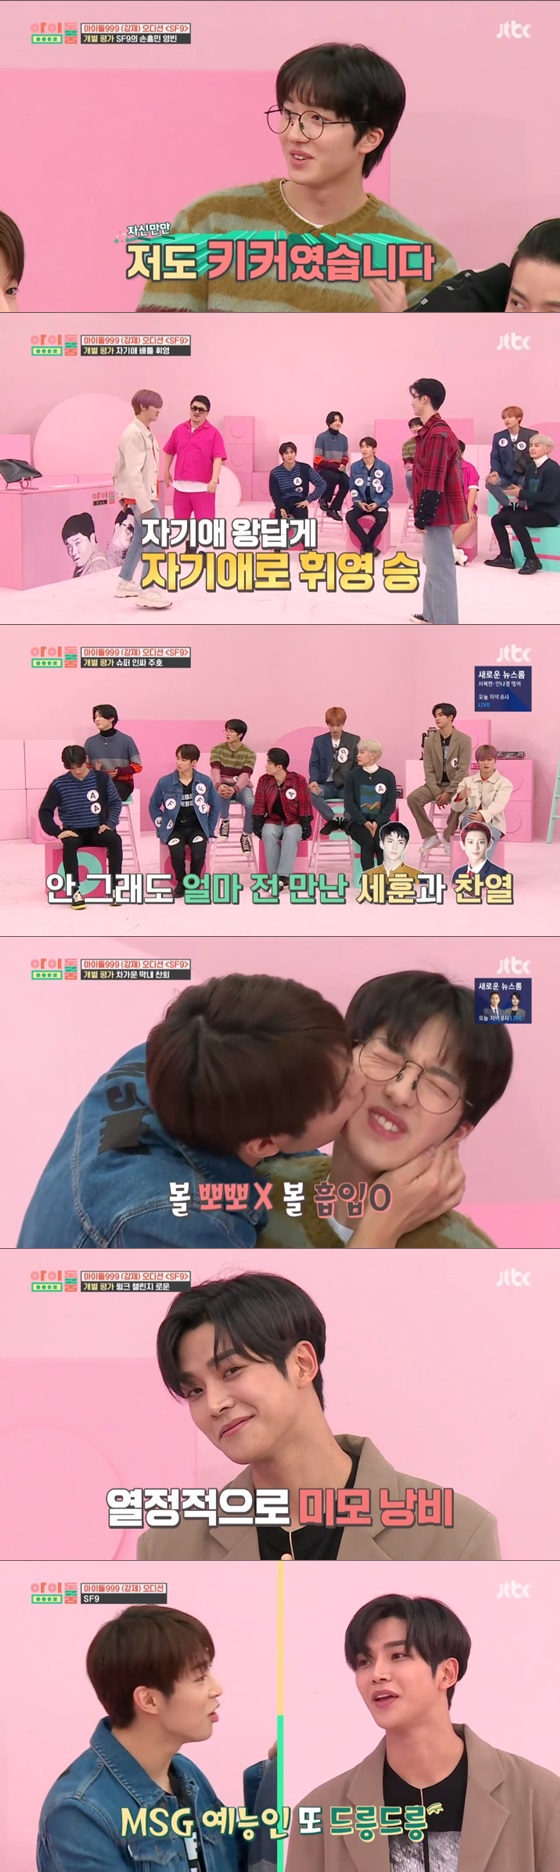 In Idol room, SF9 member Joo Ho revealed his Miniforce incredulity; a public acquaintance with Suga of BTS, Sehun of EXO and Chanyeol.In the JTBC entertainment program Idol room broadcasted on the afternoon of the 7th, the members of the group SF9 were shown to participate in the audition of Idol 999.On the day of the broadcast, Joo Ho said, I met Chanyeol and Sehun Lee of EXO last week.I would broker meetings with my EXO brothers, and the sun, a fan of EXO, is not in touch, he said.I did not meet because I wanted to make an opportunity, he said. I also go to EXO concerts.It was the same last year and this year, he added. If you really like yourself, its not good to see it next to you.On the occasion of the start of his relationship with Suga, Joo Ho said: I went to the work of my acquaintances and (Suga) was there.I heard a song I wrote with my fan, so I invited him to the workshop and listened to my song. In addition, Joo Ho said, The original close friend was Park Na-rae, Jang Do-yeons sister, and once the youngest of the Naraba meeting.From the beginning of the broadcast, the group s Jeong Hyeong-don s bark toward RO WOON of the group SF9 was unfolded.The hottest thing is RO WOON, said Jeong Hyeong-don and Defconn. Do you realize the popularity?RO WOON said, I do not know yet because I have not been able to go out well because I am doing music activities. It seems that the members can enjoy popularity now because they do not give up.Jeong Hyeong-don said that the number of views of the drama What I Found in China was 9.2 billion views, and RO WOON said, Actor RO WOON and SF9RO WOON are different, but it is certain that they do their best in a given situation.RO WOON explained that both singer and acting activities are precious, and that I was not funny originally when I pointed out that I felt like I had Actor disease.After shooting the drama, Dawon showed off his artistic sense with MSG pro-speech about the change of RO WOON.Dawon said, There is nothing that has changed, but when I concentrate on my work, I tend to give members a favor.He then joked for laughter, such as RO WOON sometimes slaps his cheek and I woke up RO WOON today.RO WOON said, I learned horseback riding and tennis because of my drama, but I enjoy it because it is fun. It is a hobby that workers can easily access these days.Dawon looked at RO WOON and said, I recently bought a car, but it was not true and laughed.In addition, RO WOON explained the difference in acting before and after finding the self in Drama.Kang Chan-hee, who challenged Acting with Drama Sky Castle before RO WOON showed an Acting demonstration, praised the soulless praise, saying, RO WOON seems to be really good at Acting.RO WOON confessed that he was a wink-stupid person and that he also opened his eyes when archery was performed in Ajikdae; its not really wink.He frowned and showed himself a poor wink, which he was praised by MCs as a face wasting.On the other hand, the members of SF9 showed their desire for entertainment.When Jeong Hyeong-don asked who the next (popular) runner after Kang Chan-hee, RO WOON, the member personality replied, I want it.I think its better to go to the entertainment side, said Dawon. I want to do too much entertainment.Another member, Whee Young, showed his emphasis on Self-Battle. He expressed confidence in his appearance, saying, I am younger than my brother and I am pretty face.Wheeyoung said, I dance better than you, and the words My brother is so good at dancing that he can not sing more than me.Kang Chan-hee played as the  youngest tower; he said, I hate skinship, and Is saliva on my face when I kiss you?The mission was to get a ball kiss. Kang Chan-hee closed his eyes and received a kiss from the entire members and Jeong Hyeong-don.Jeong Hyeong-don appeared as the last batter and wuzu after putting Kang Chan-hee on his lap and kissed his ears and cheeks.After the kiss, Kang Chan-hee expressed his rejection, saying, Is there no rest?Kang Chan-hee then showed a disclosure and candid youngest charm to RO WOON, who is four years older than himself.RO WOON took his padding and did not return it, and when I said it was the only padding with Katok, I said there was no RO WOON, he said.RO WOON said, I took it because it looked pretty. After jokingly accepting it, I had my padding, but it changed with Kang Chan-hee.Kang Chan-hee finished with a warm heart, saying, My brother was sorry and bought me something delicious.